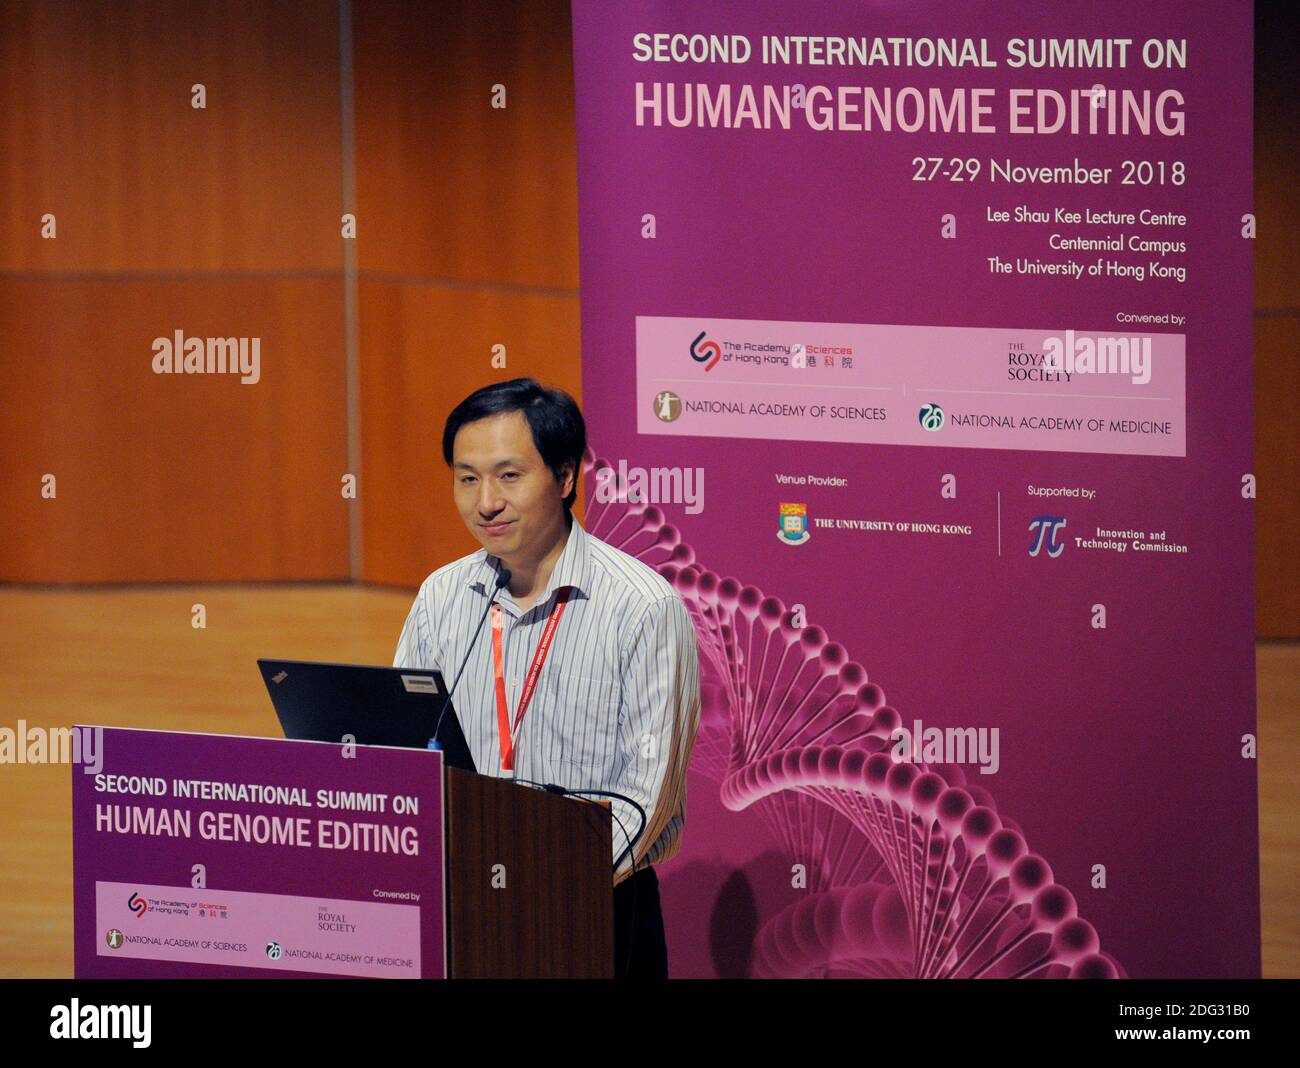 Chinese biologist He Jiankui gives a presentation at Hong Kong University during the Second International Summit on Humane Genome Editing. He had biologically altered the genome of two twins in an attempt to make them resistant to AIDS, which their biological father had. He was condemned by the scientific community, and was taken into custody immediately after his talk and was eventually jailed. Stock Photo